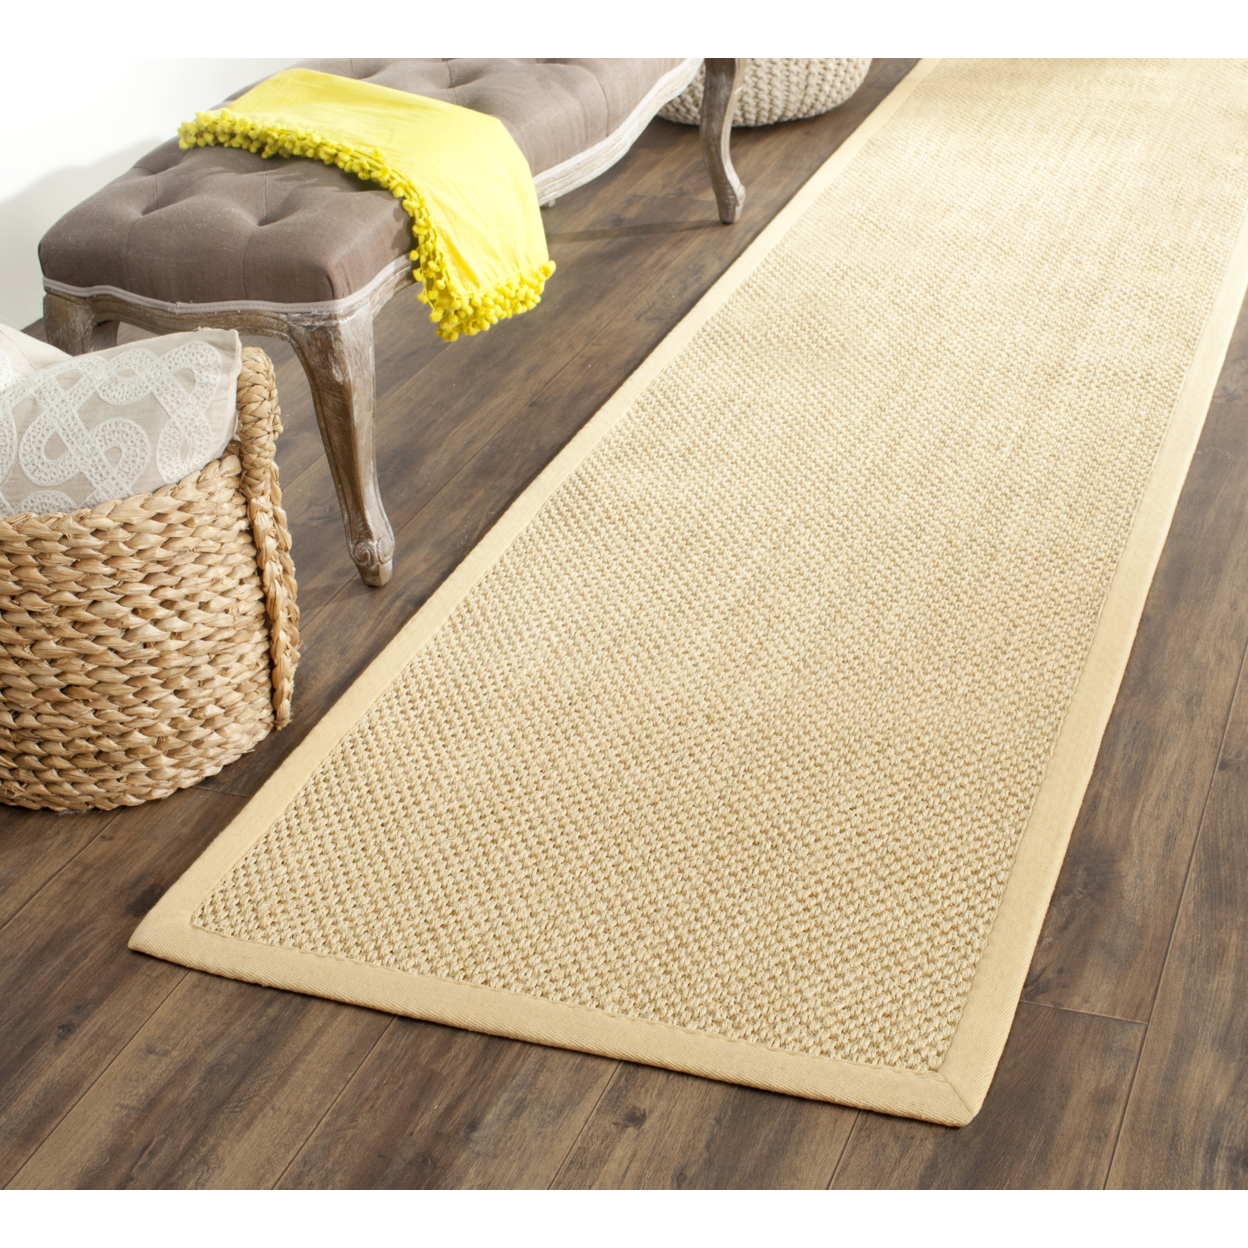 SAFAVIEH Natural Fiber Collection NF443A Maize/Wheat Rug - 2' 6 X 22'